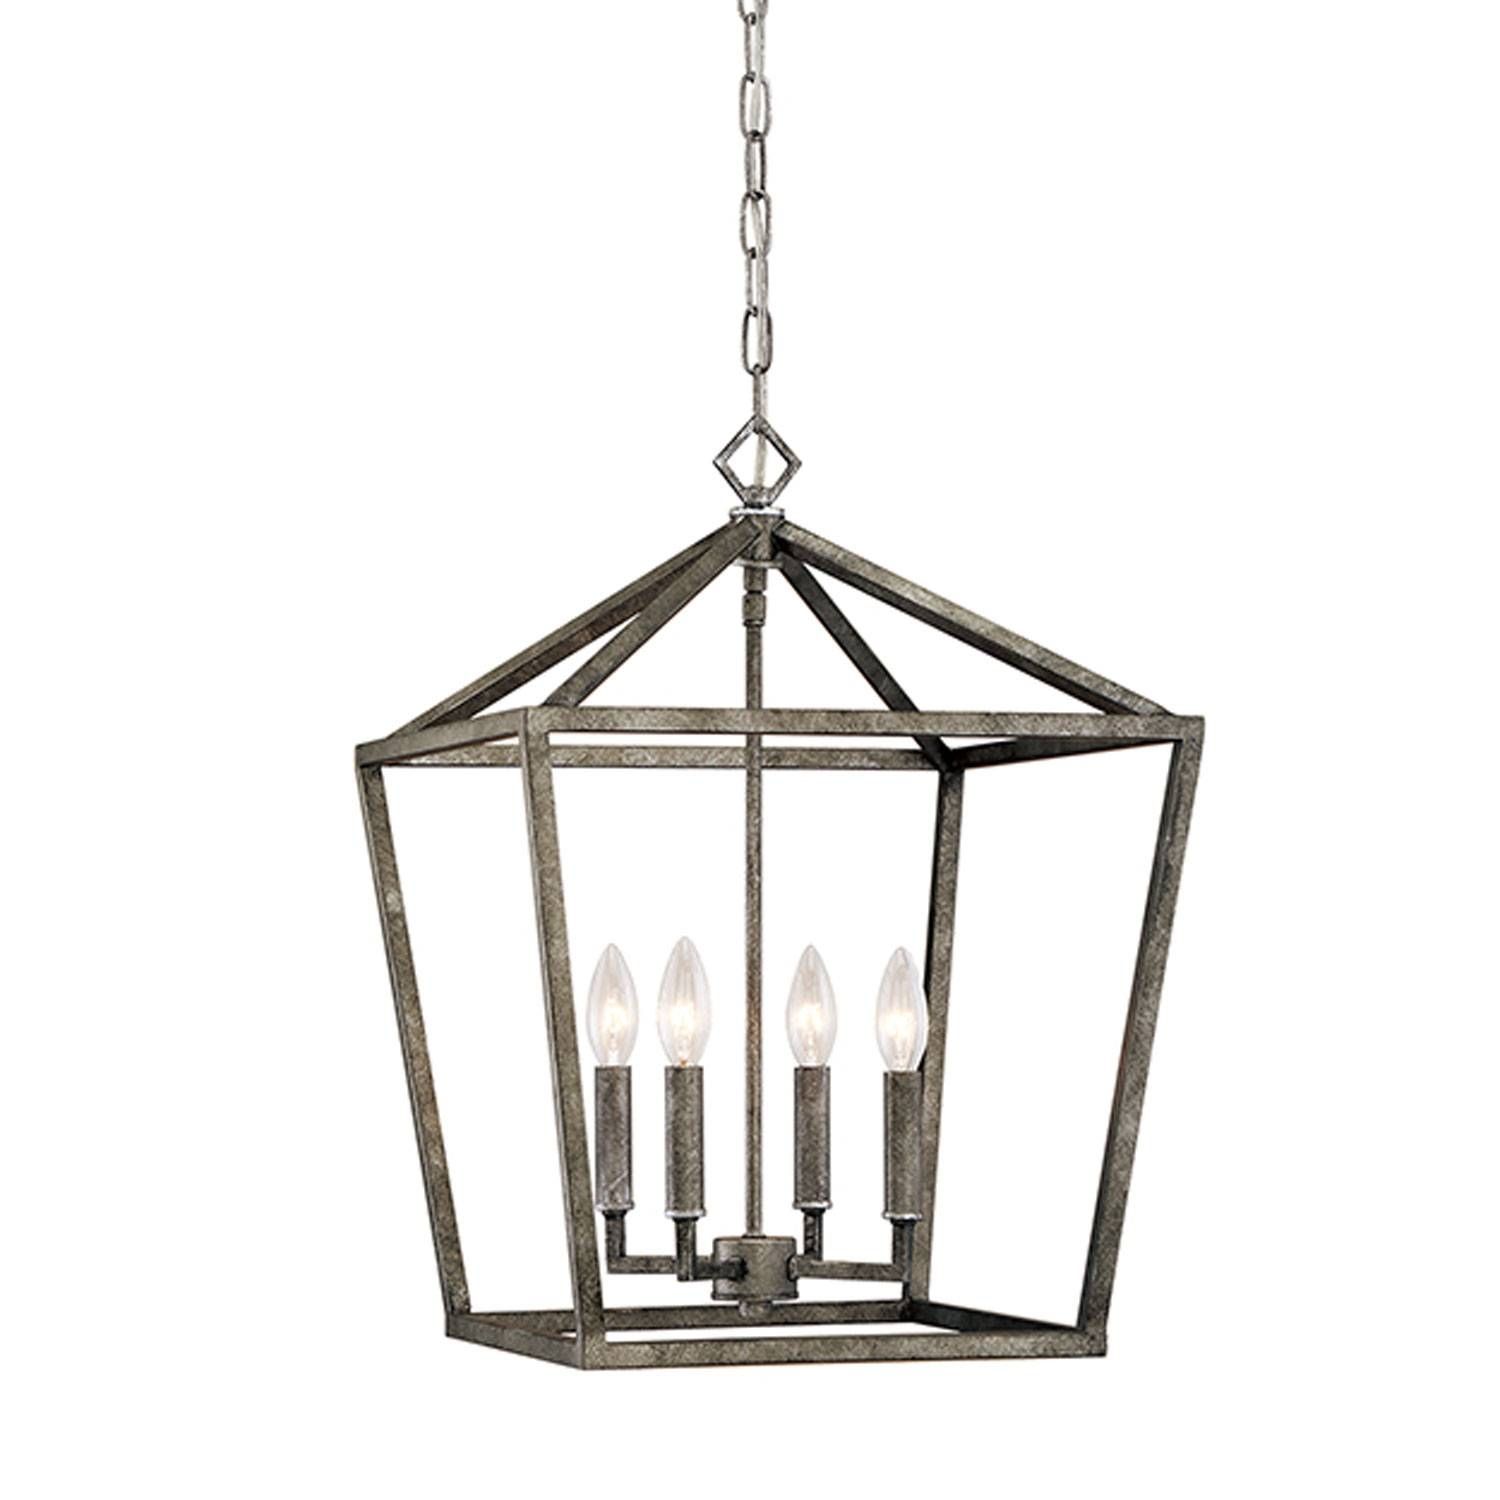 Bellacor Lantern Pendant Lighting Adds A Cheery Glow To Any Room Pertaining To Lantern Style Pendants (View 15 of 15)